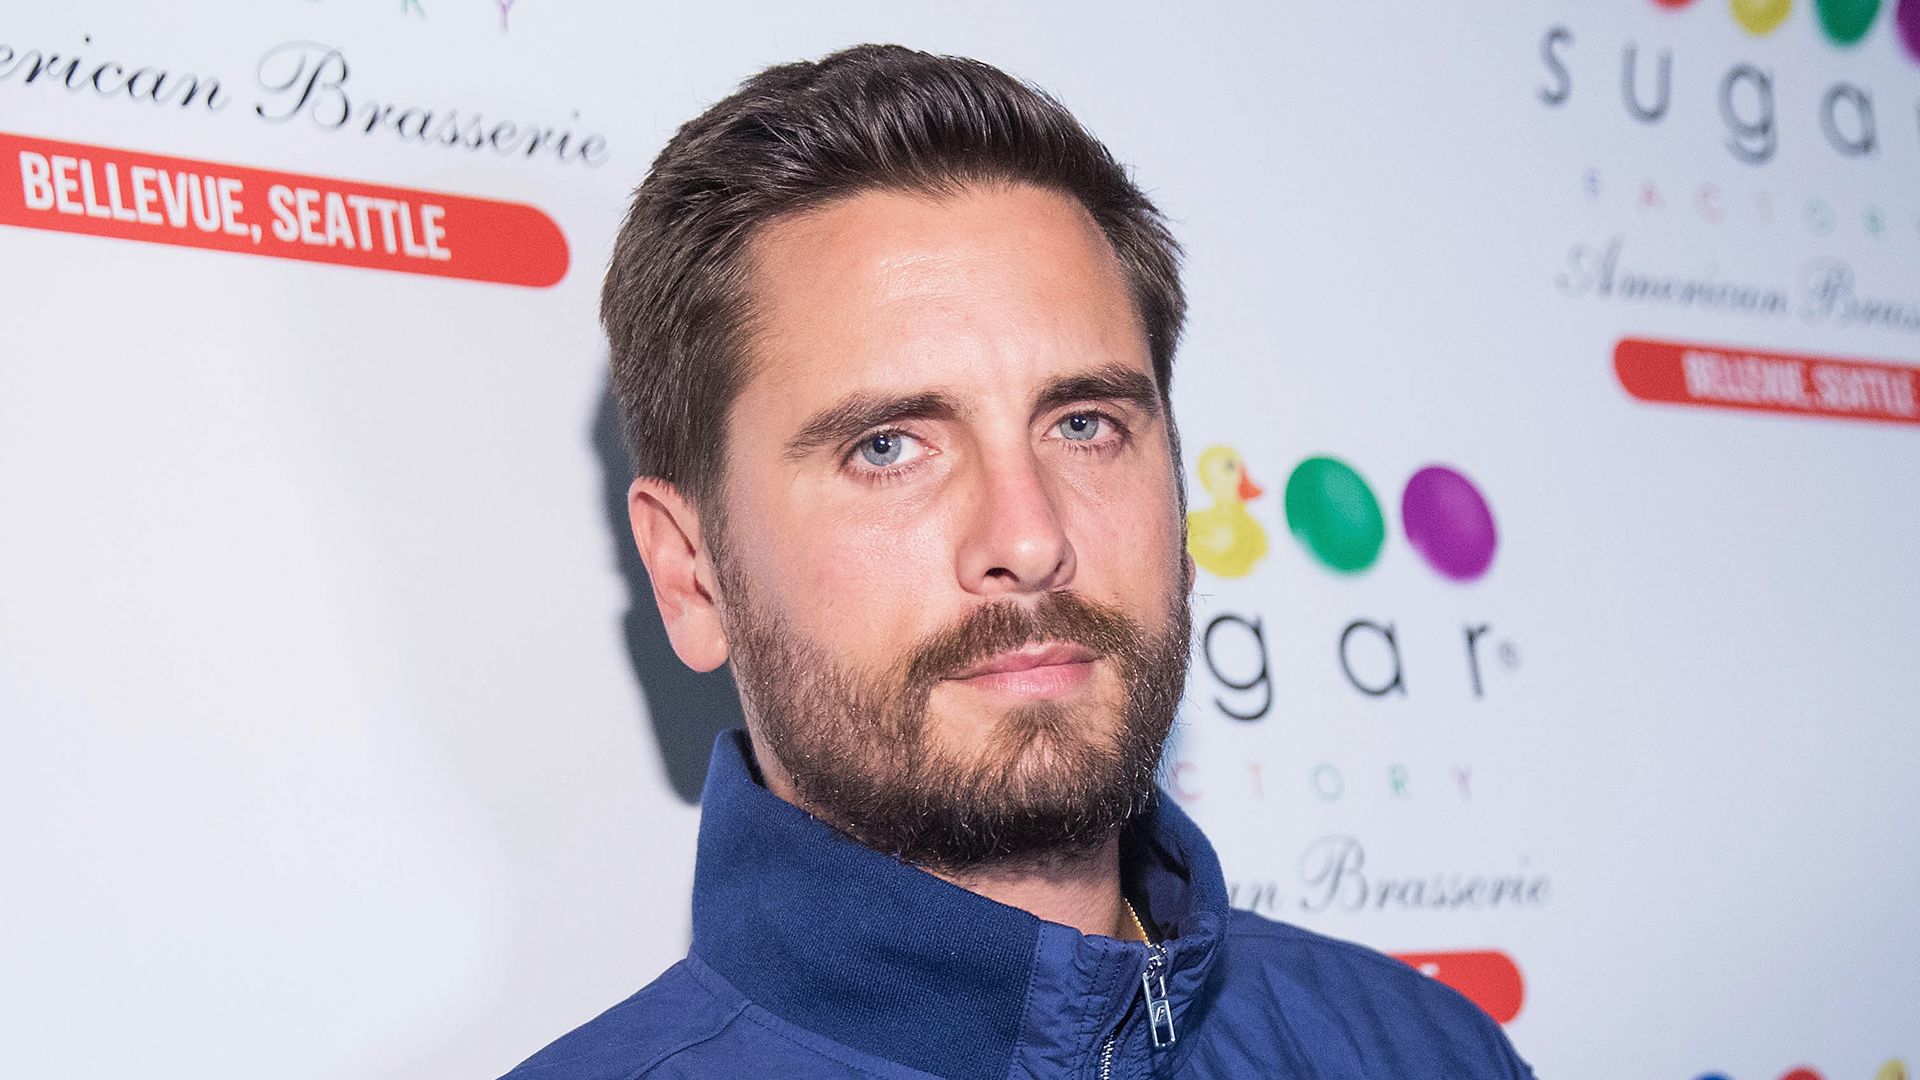 Scott Disick Enters Treatment For Alcohol & Drug Abuse (Reports)